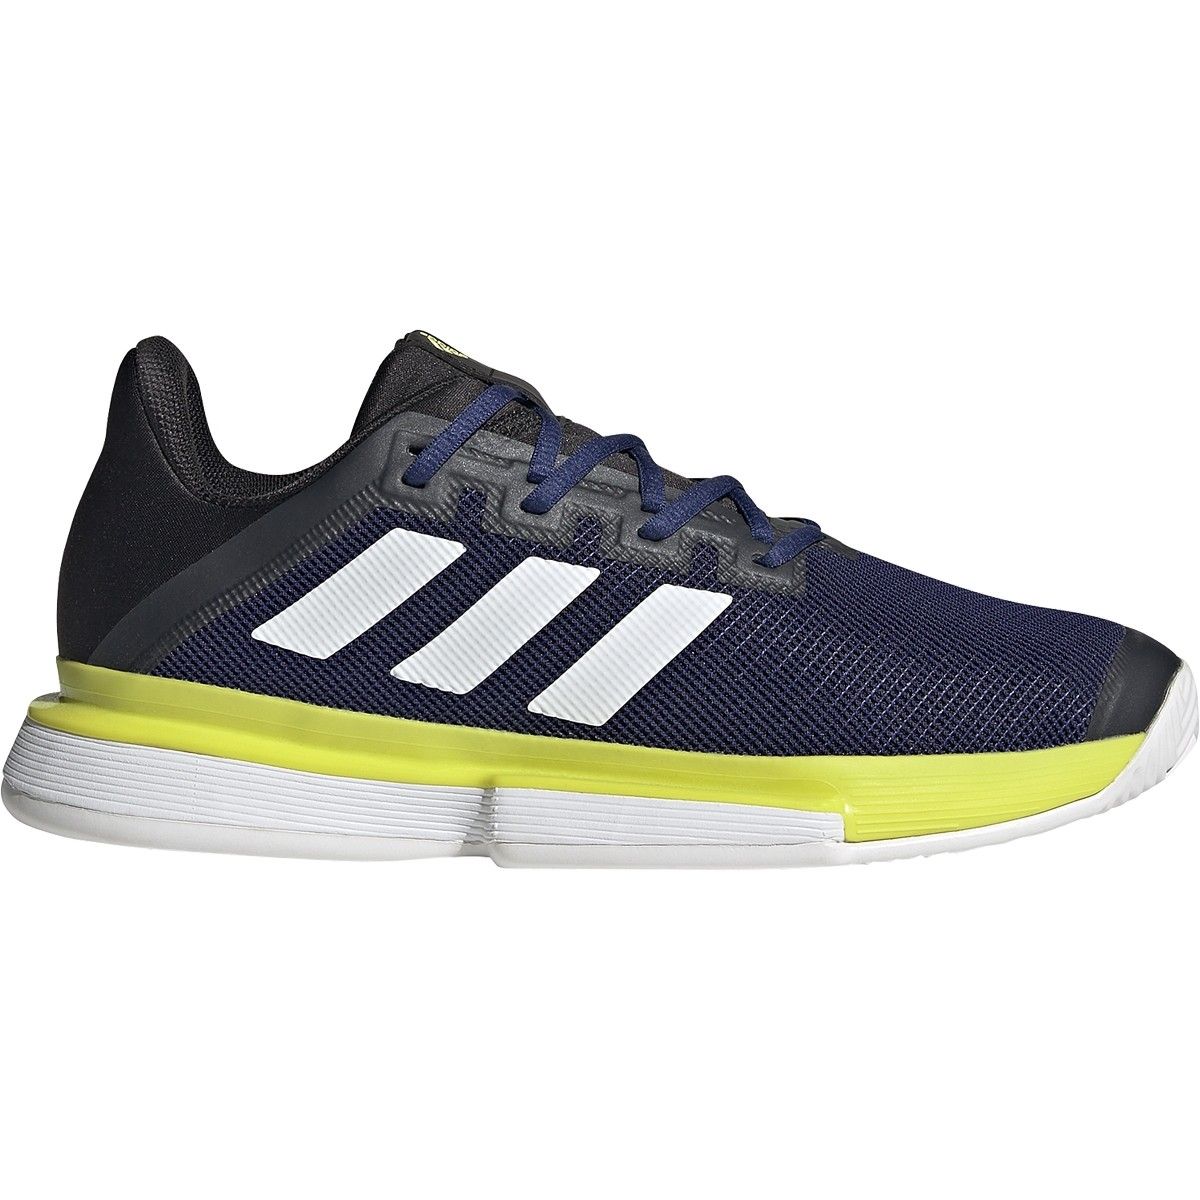 adidas SoleMatch Tennis Shoes GY7645